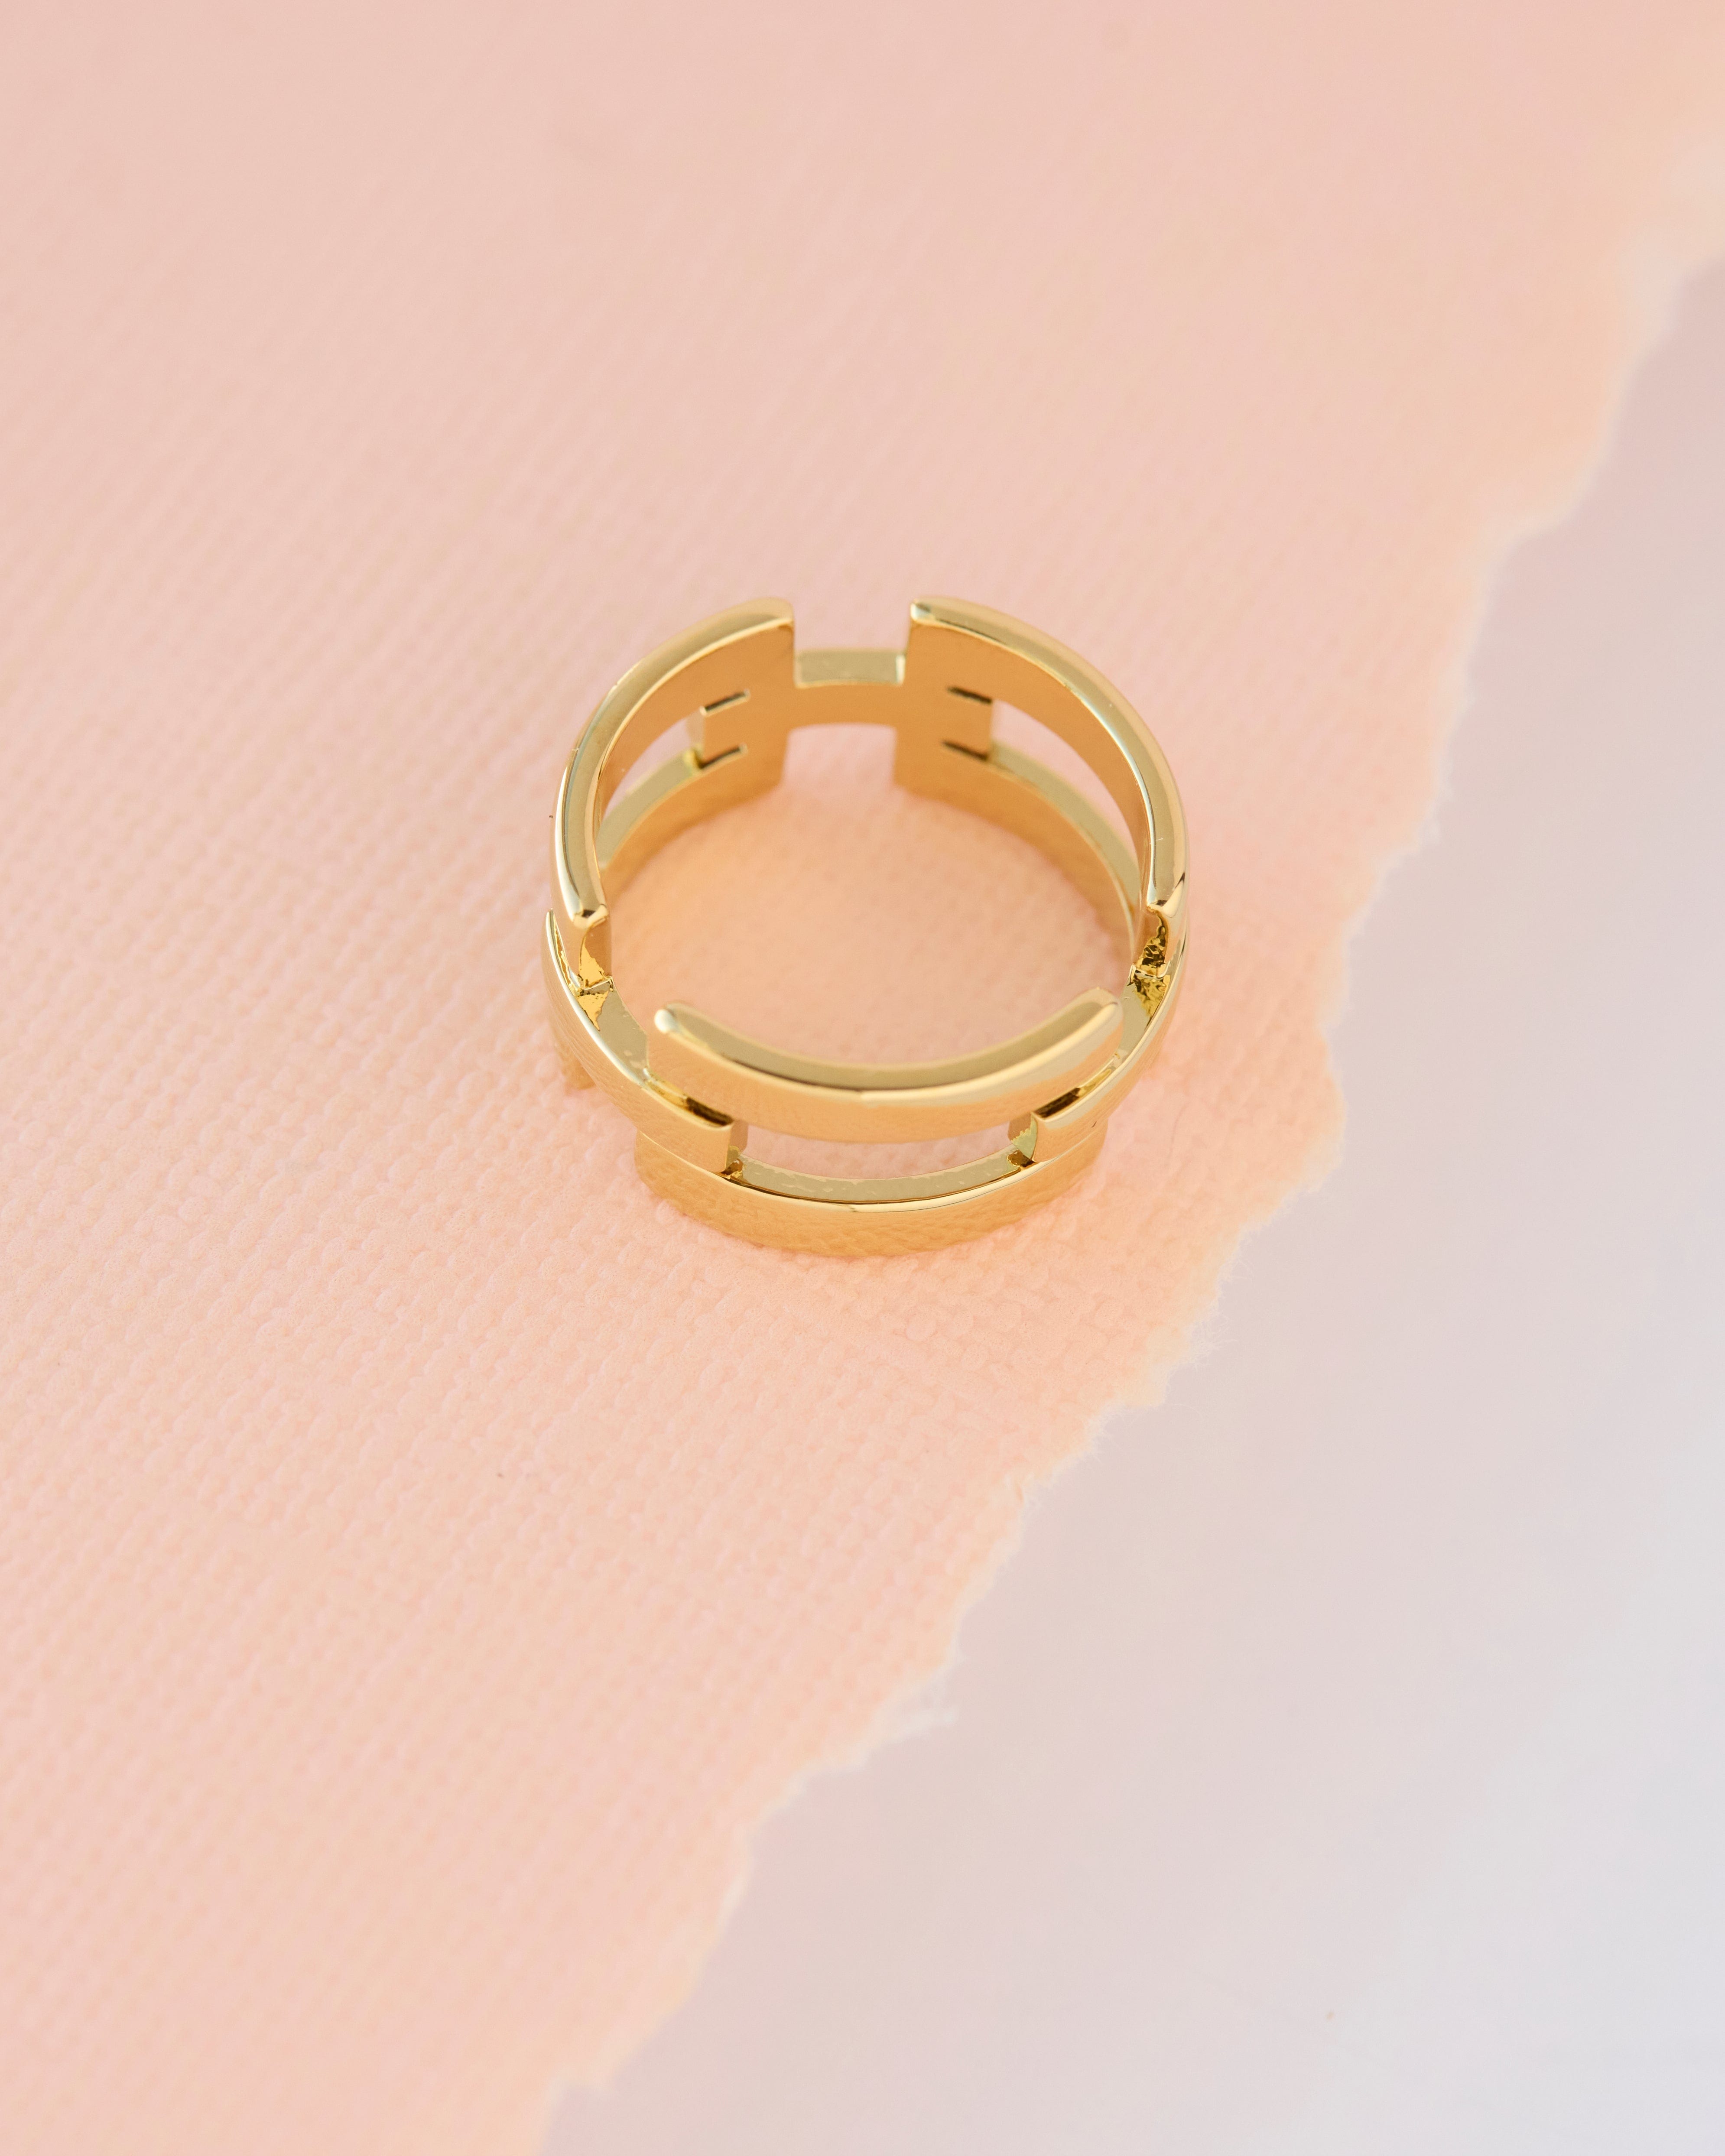 Gold ring with 3 rectangles